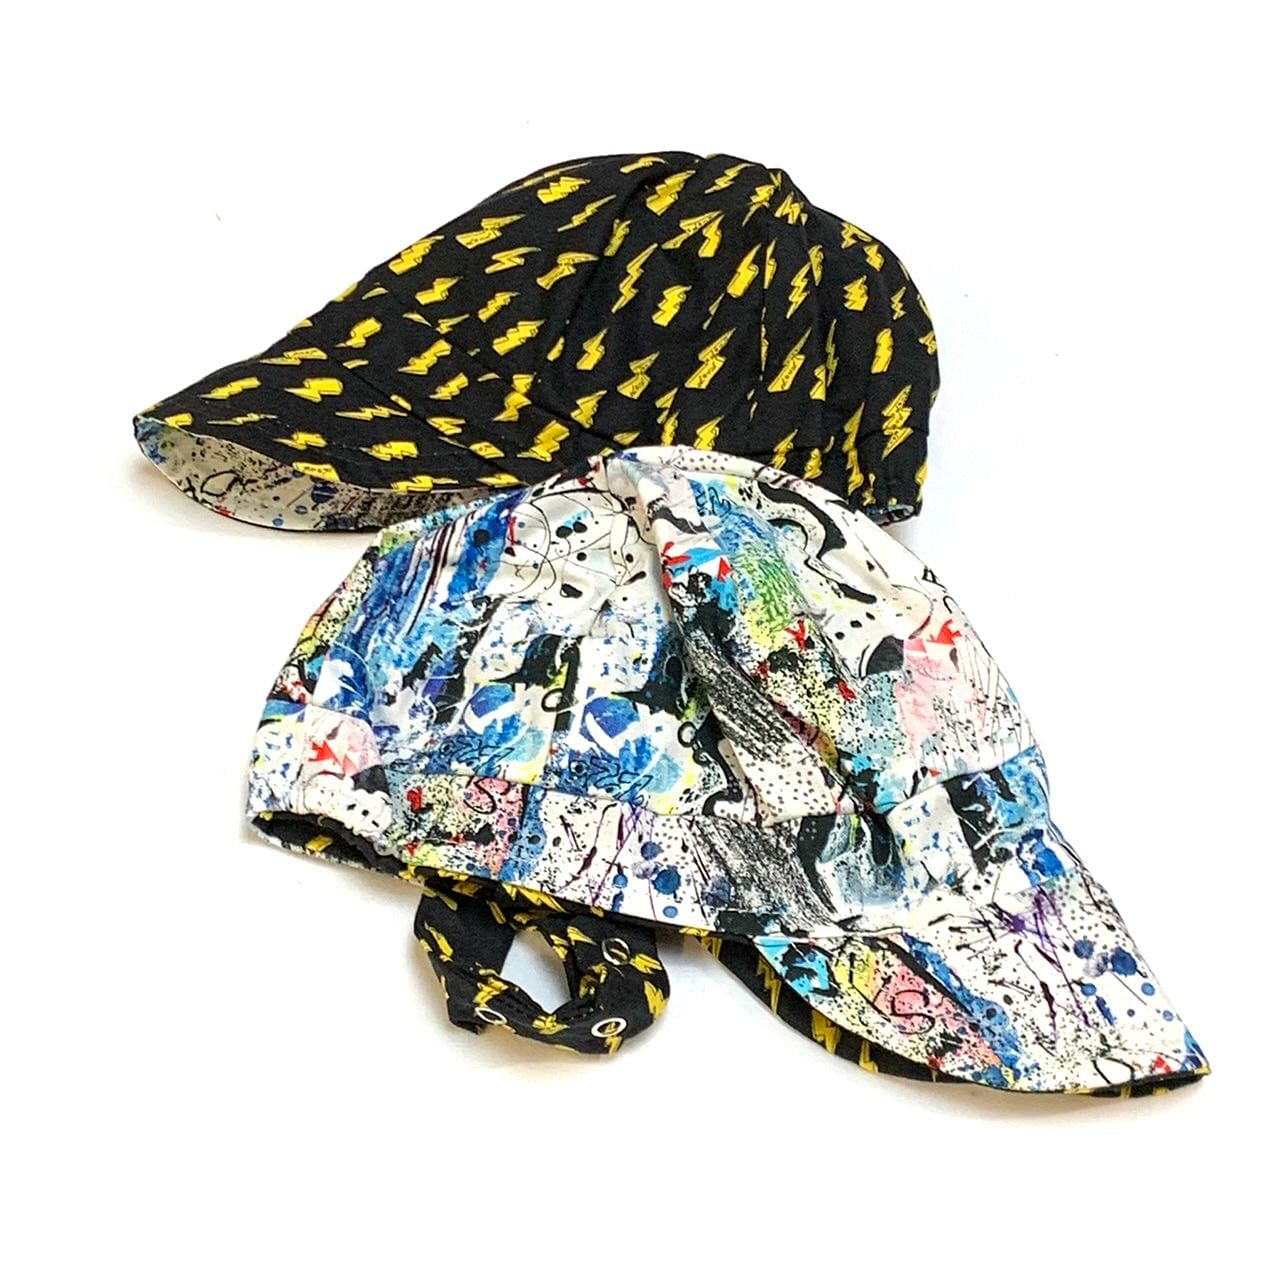 Louis Vuitton Hats products for sale